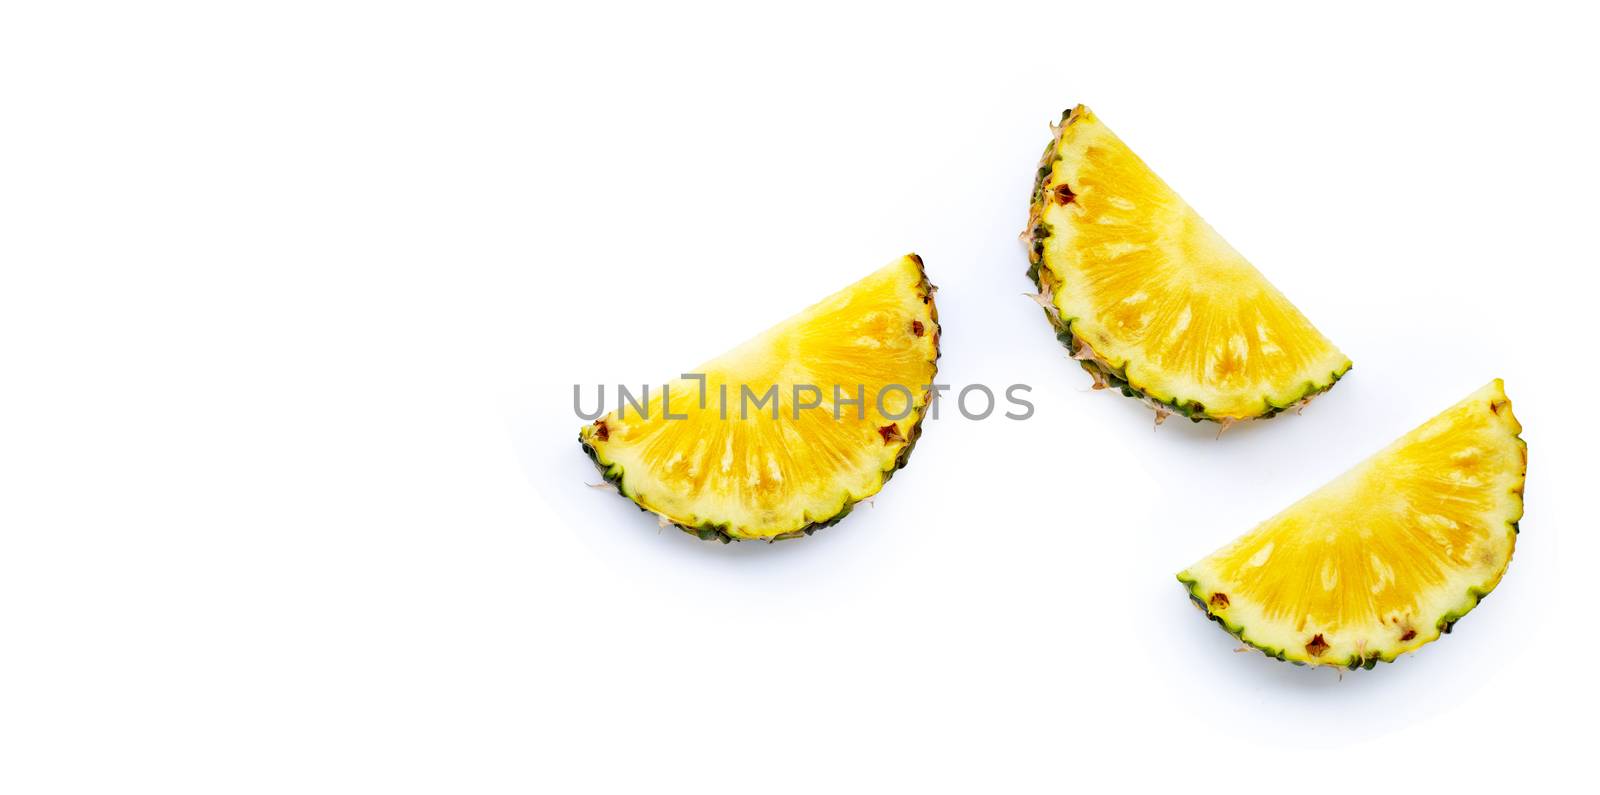 Fresh pineapple slices on white background. by Bowonpat